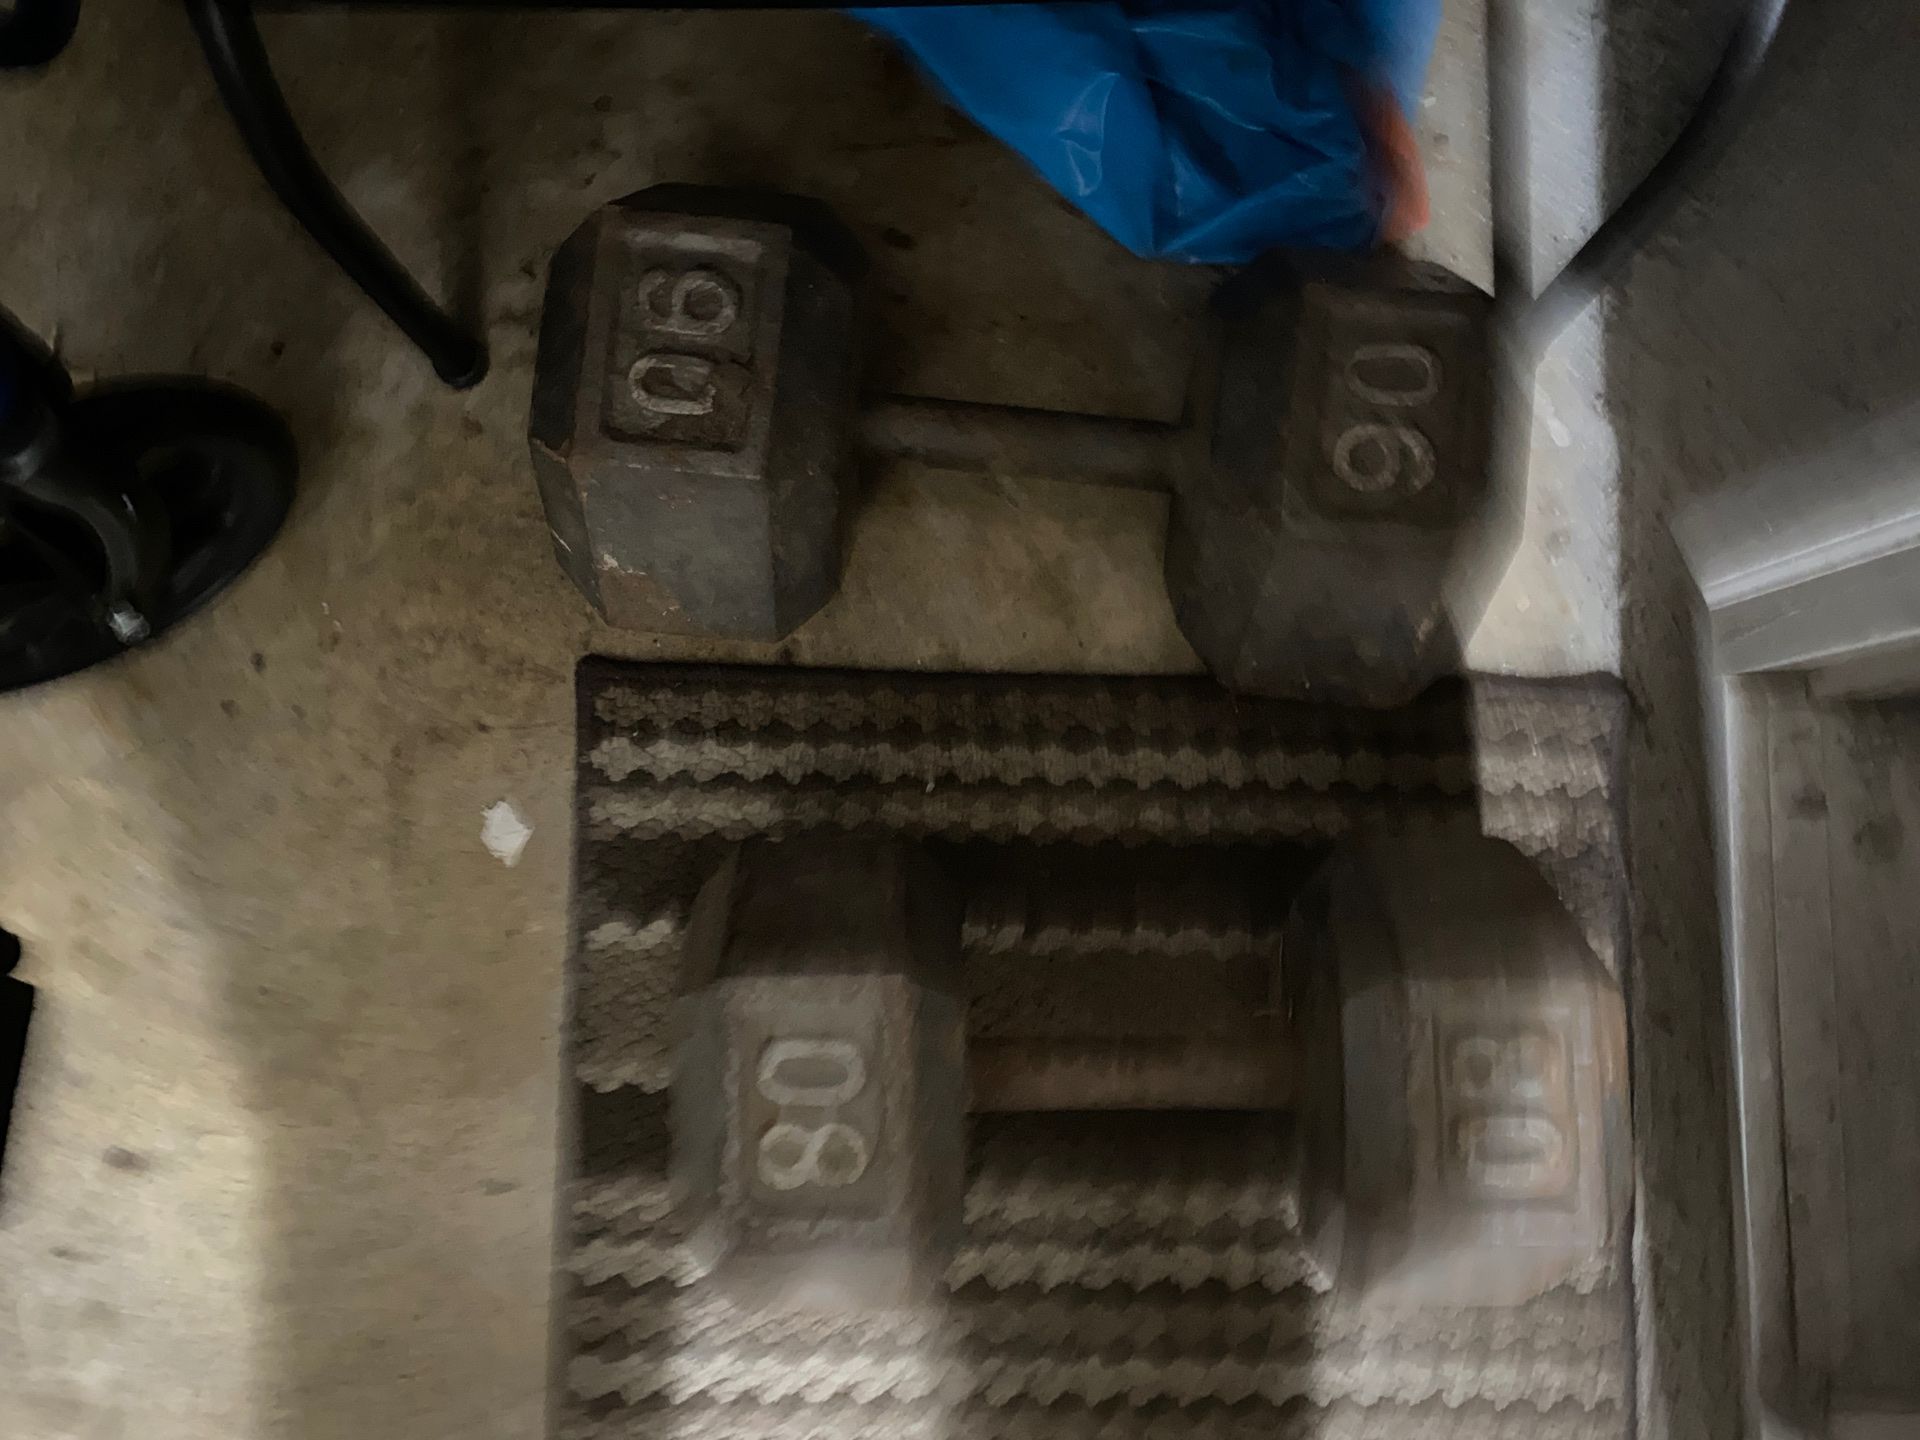 Have some weights for sale 1 -90 and 1- 80 not a set